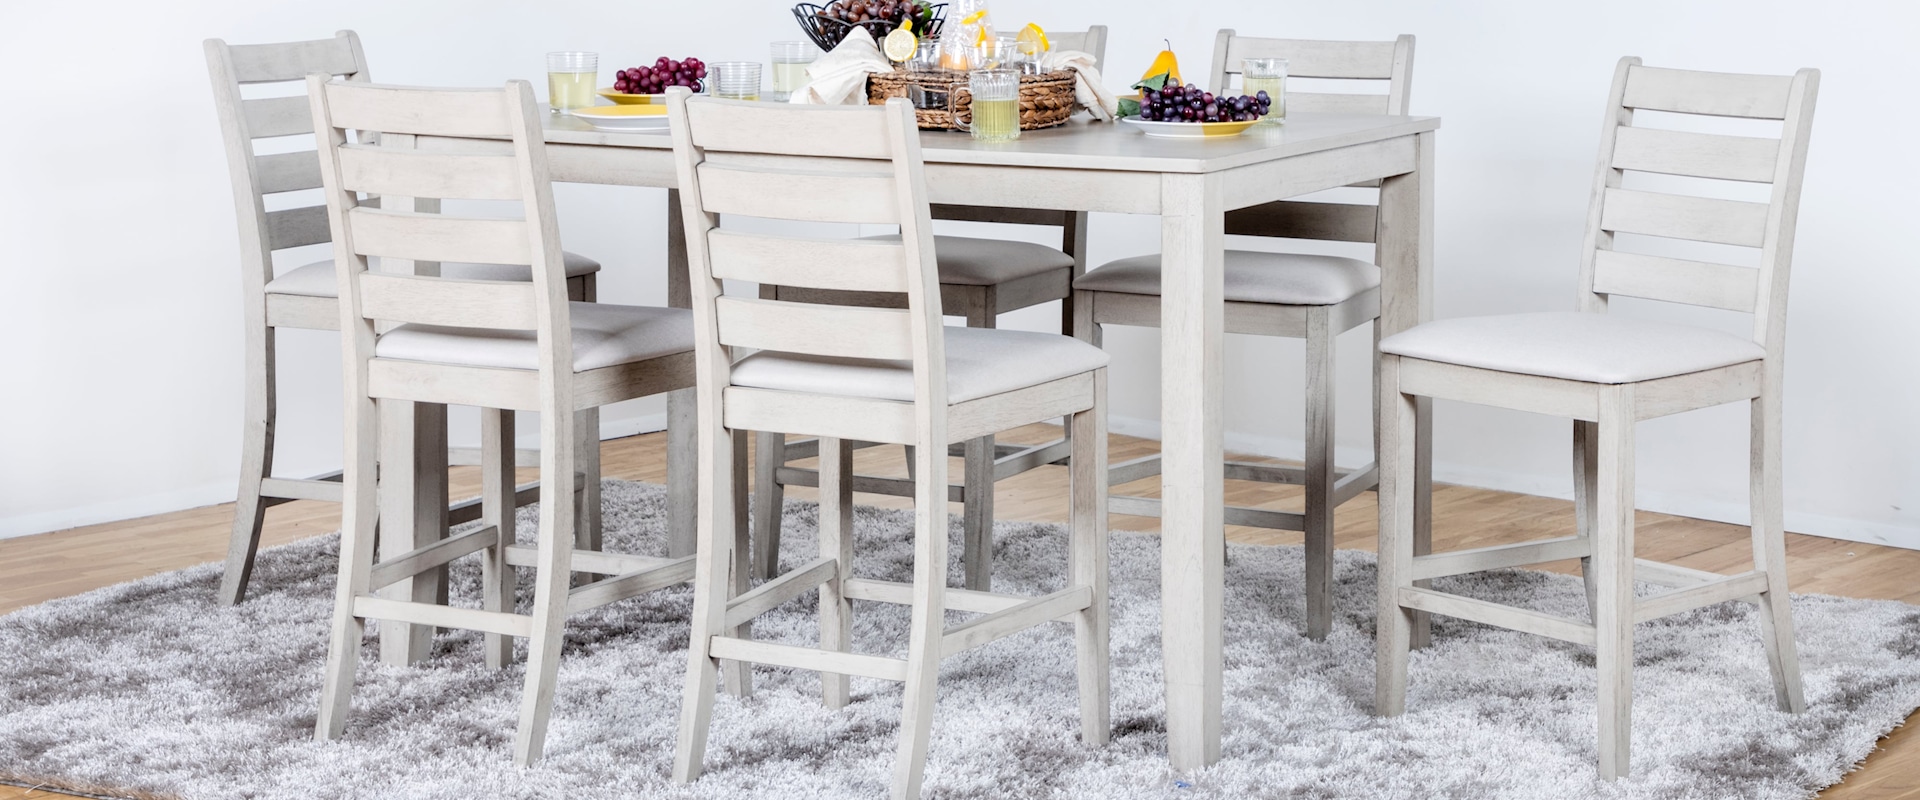 Farmhouse 5-Piece Counter Height Dining Set